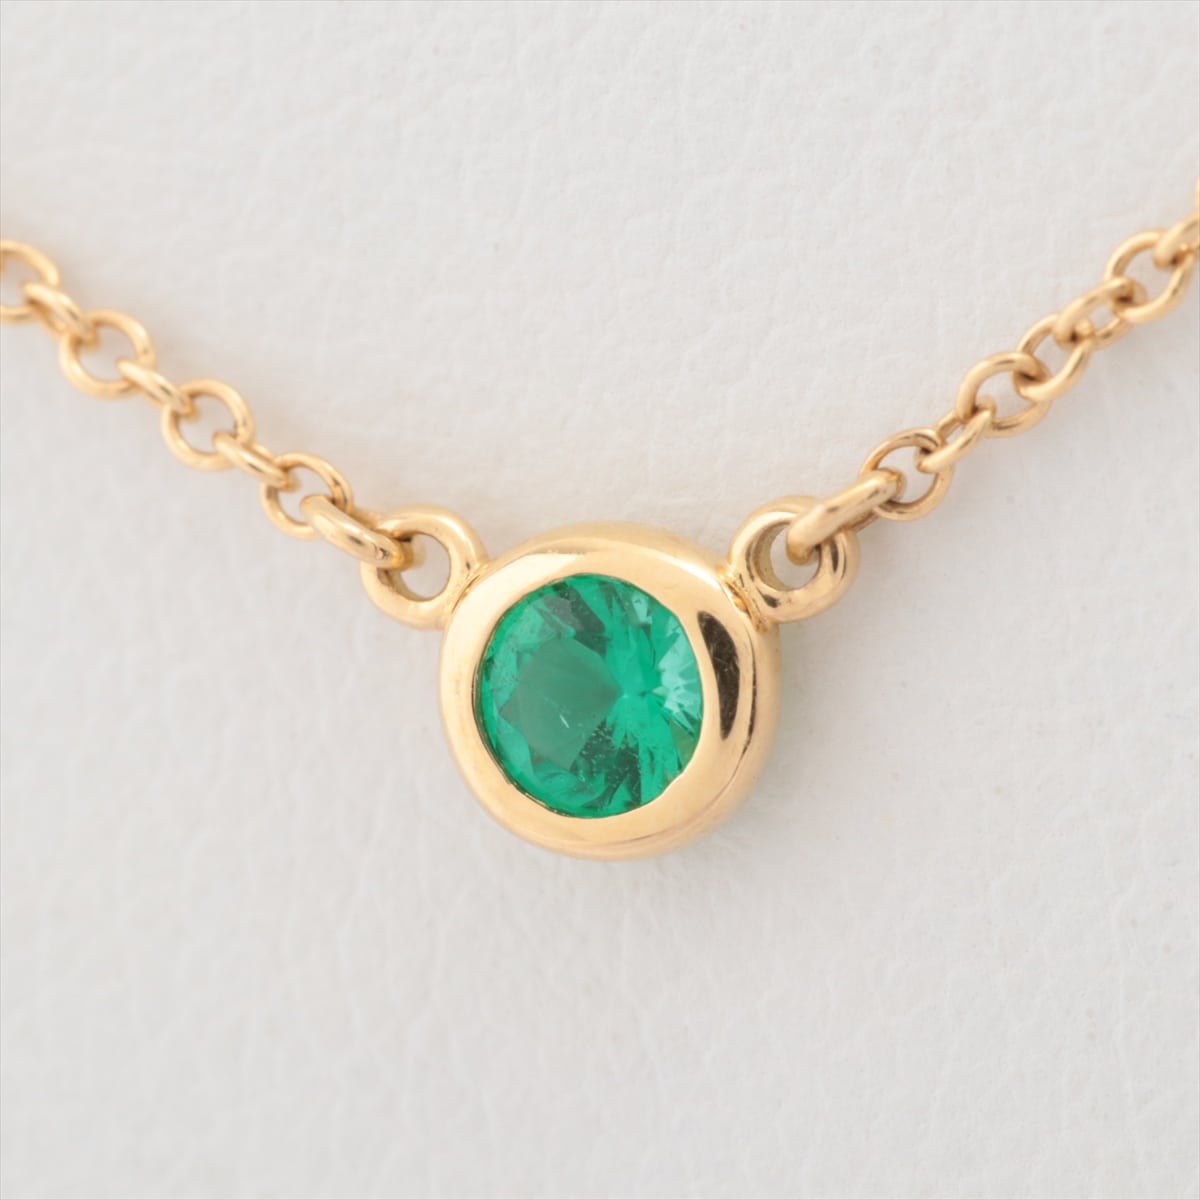 Tiffany Kolor By the Yard Emerald Necklace 750(YG) 1.9g Approximately 4 in diameter.34mm